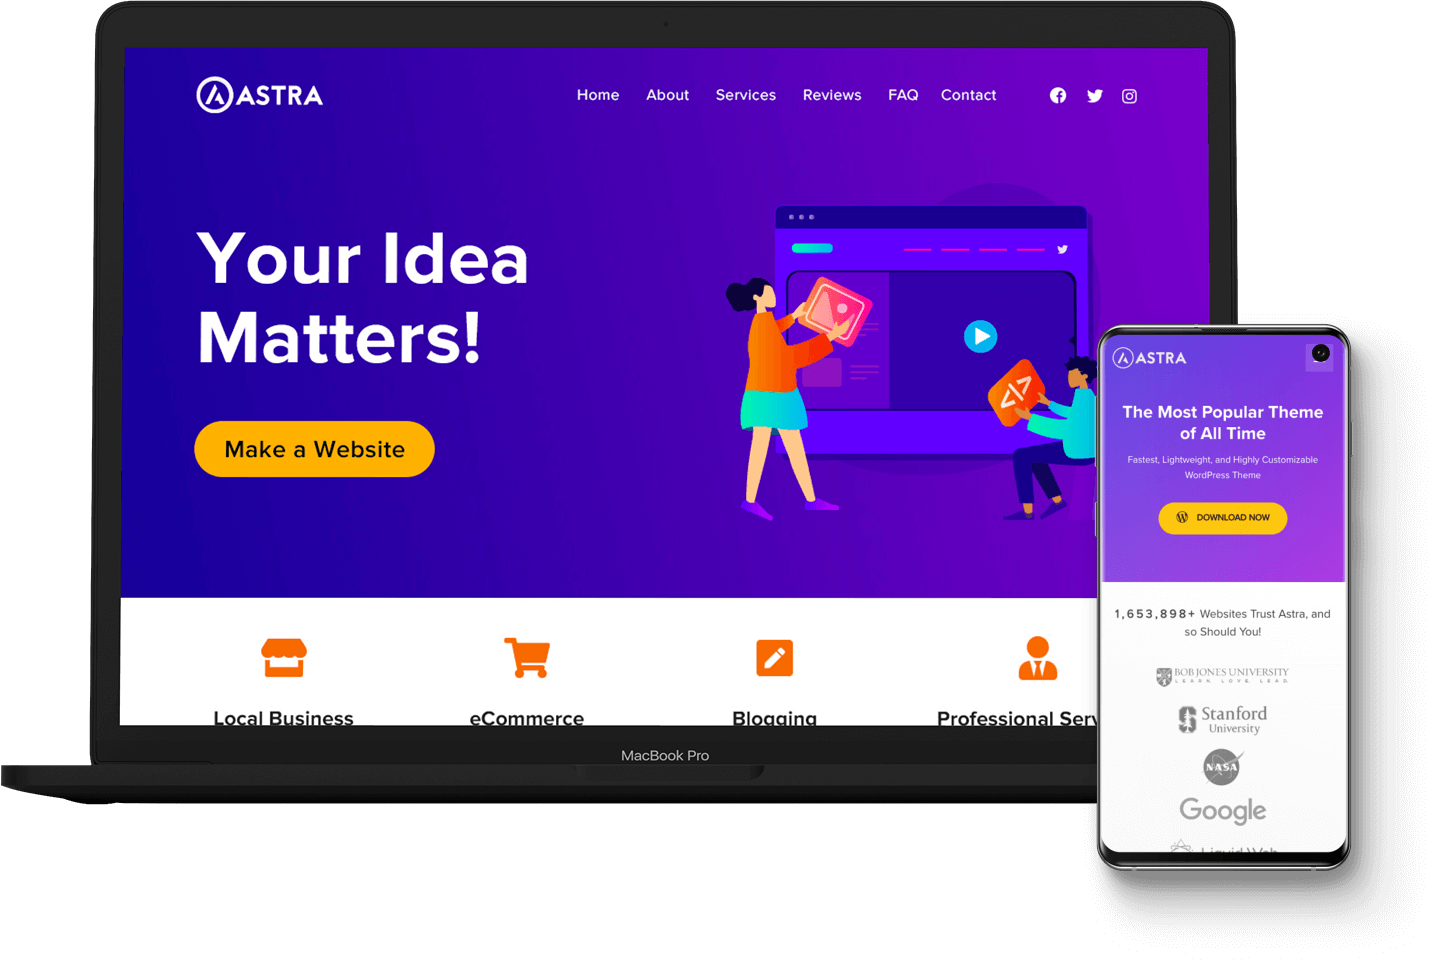 Astra is also one of the fastest business WordPress themes.